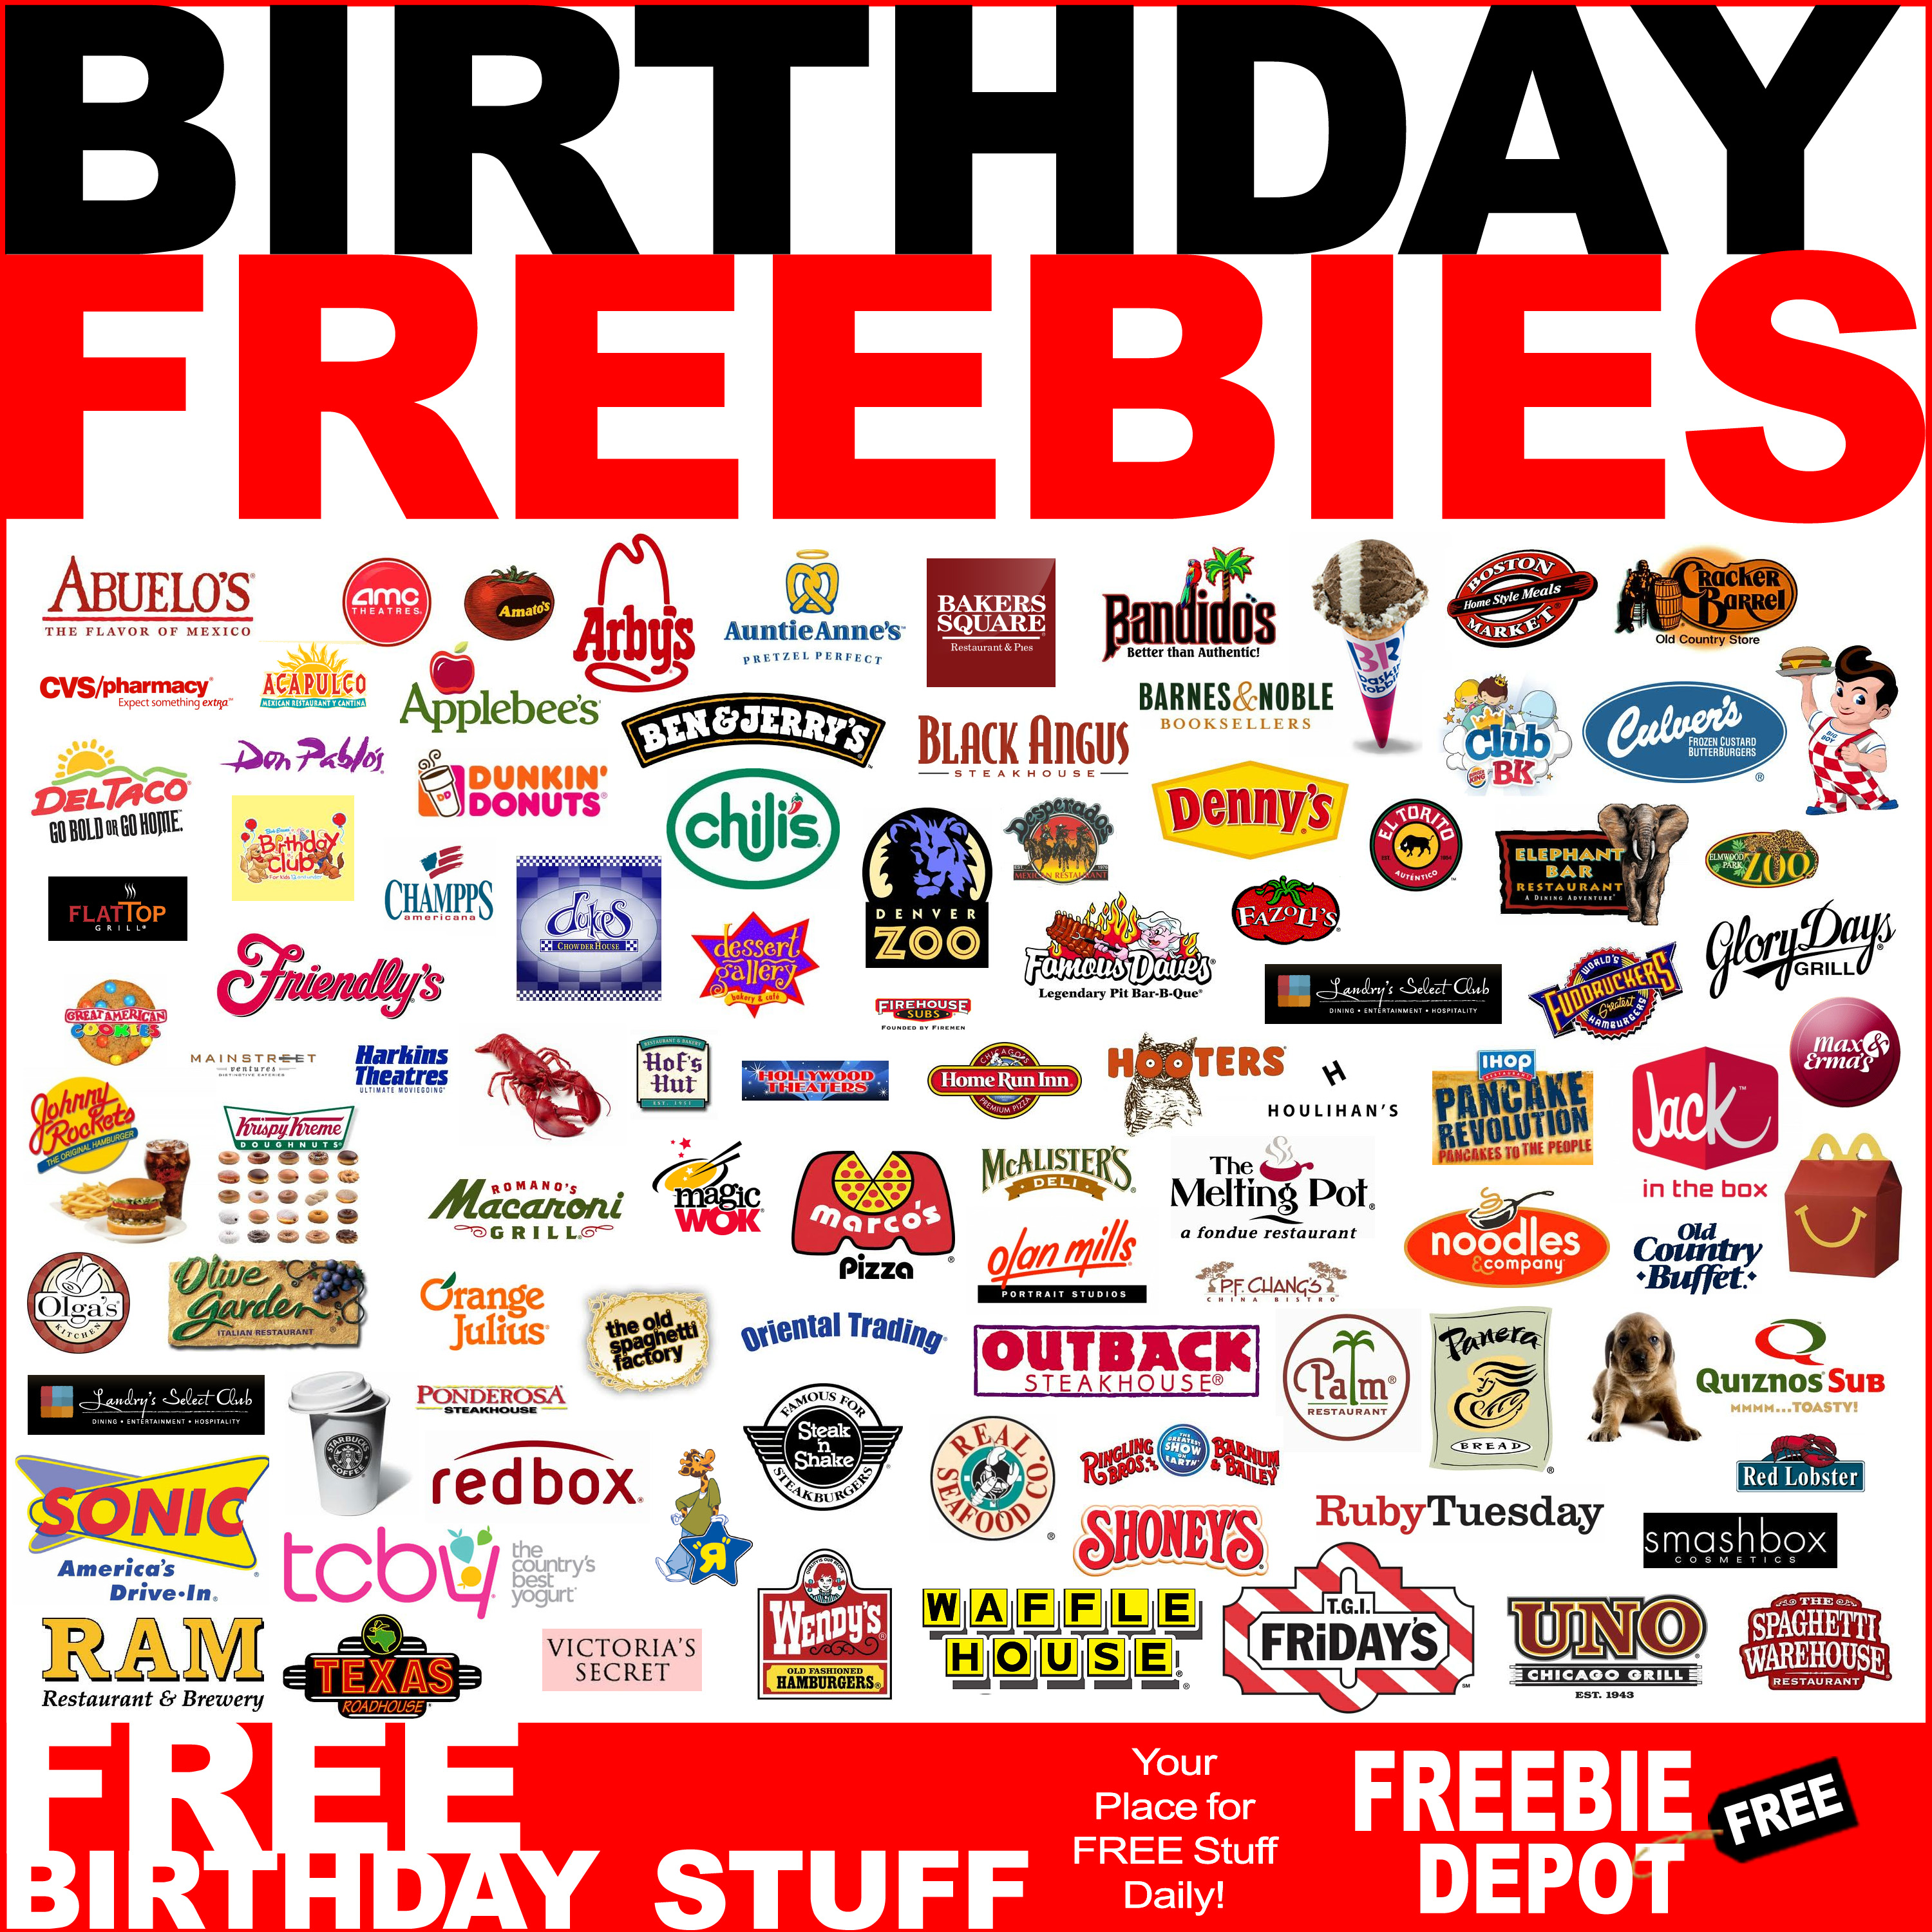 700 Best Birthday Freebies in 2023 – Where to get FREE Birthday Food Discounts: Treat Yourself Celebrate with Birthday Deals, Rewards, Gifts